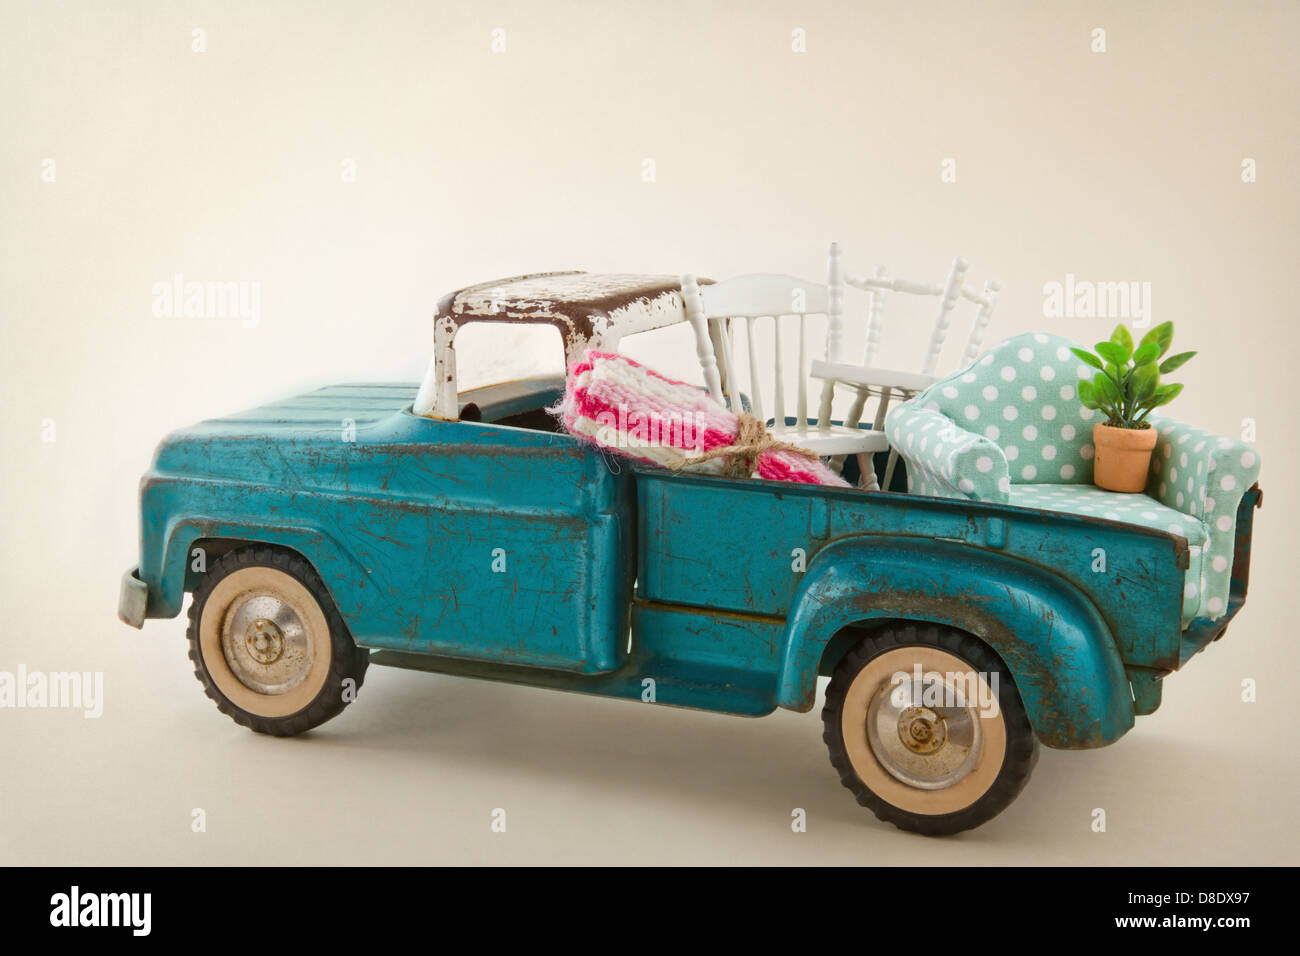 Old vintage toy truck packed with furniture - moving houses concept Stock Photo